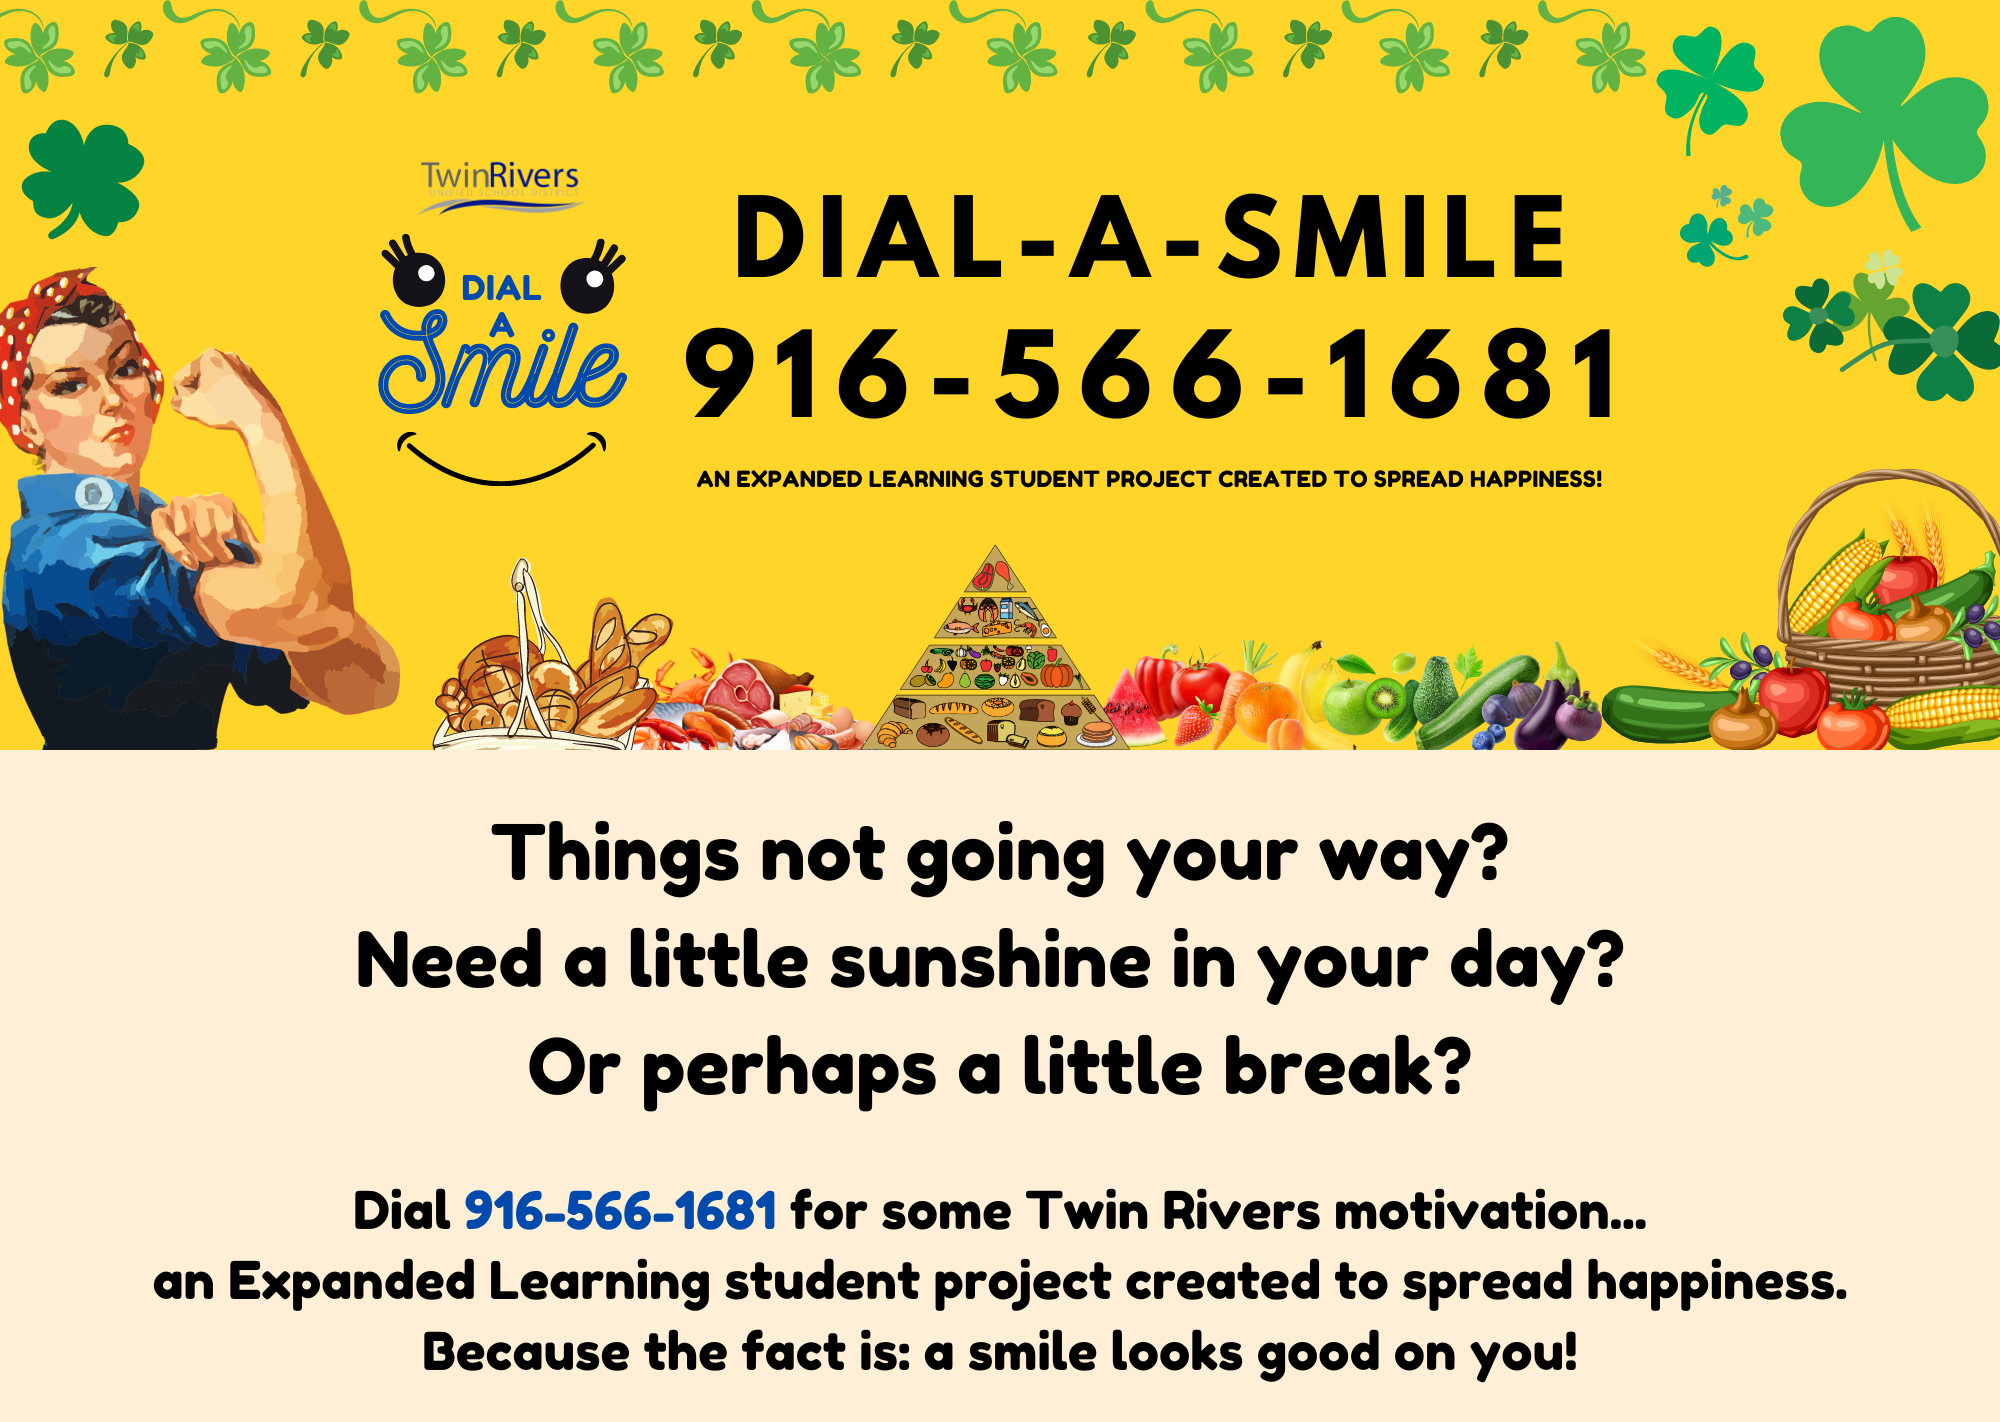 Dial-A-Smile February Banner, Things not going your way? Need a little sunshine in your day? Or perhaps a little break? Dial 916-566-1681 for some Twin Rivers motivation... an Expanded Learning student project created to spread happiness. Because the fact is:  a smile looks good on you!